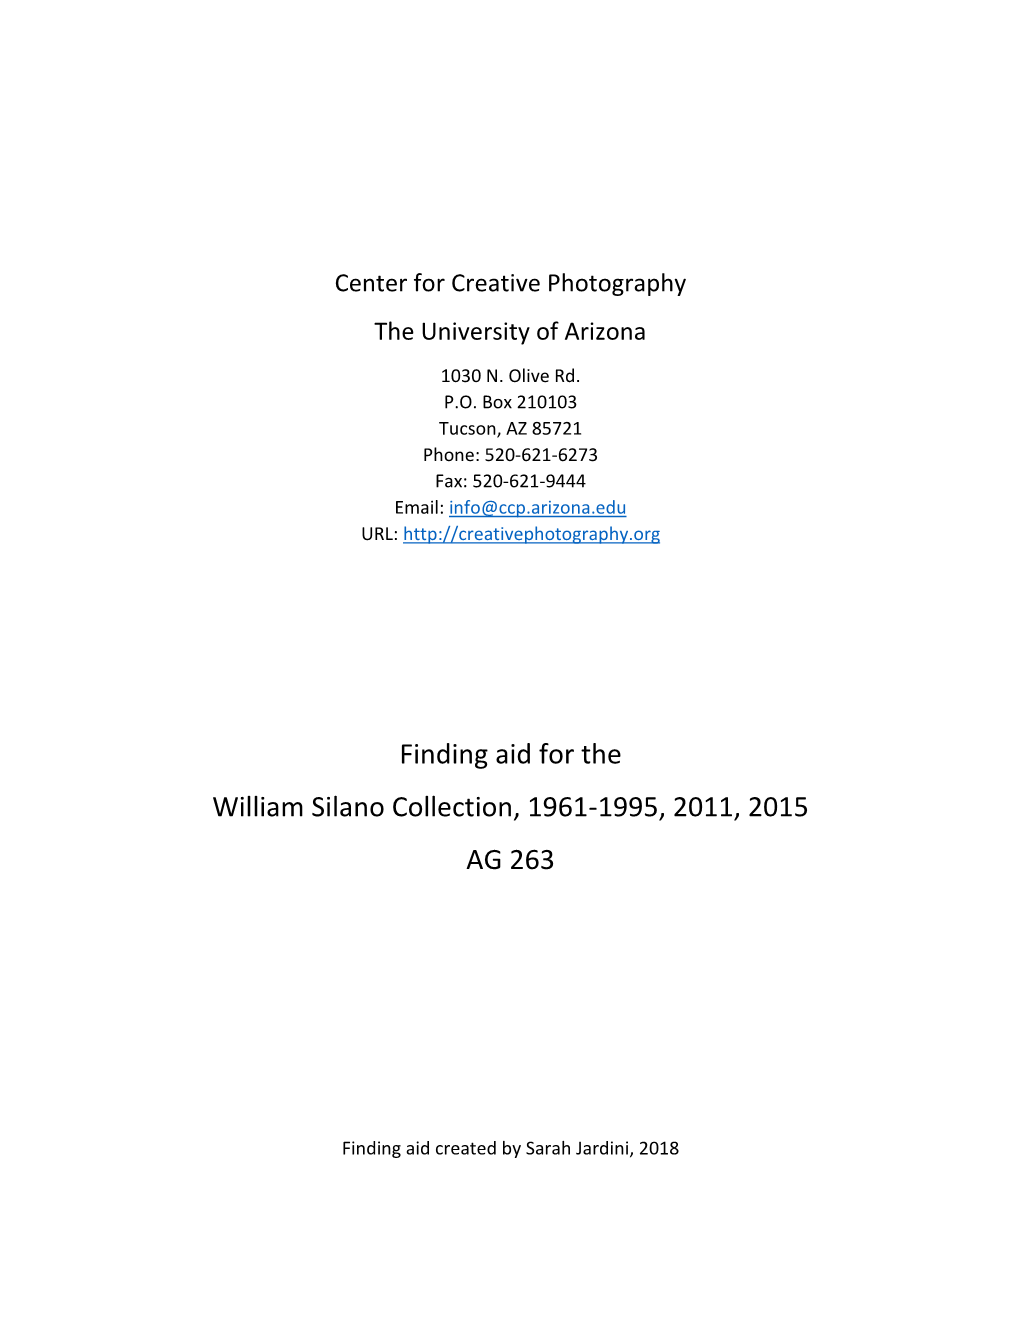 Finding Aid for the William Silano Collection, 1961-1995, 2011, 2015 AG 263